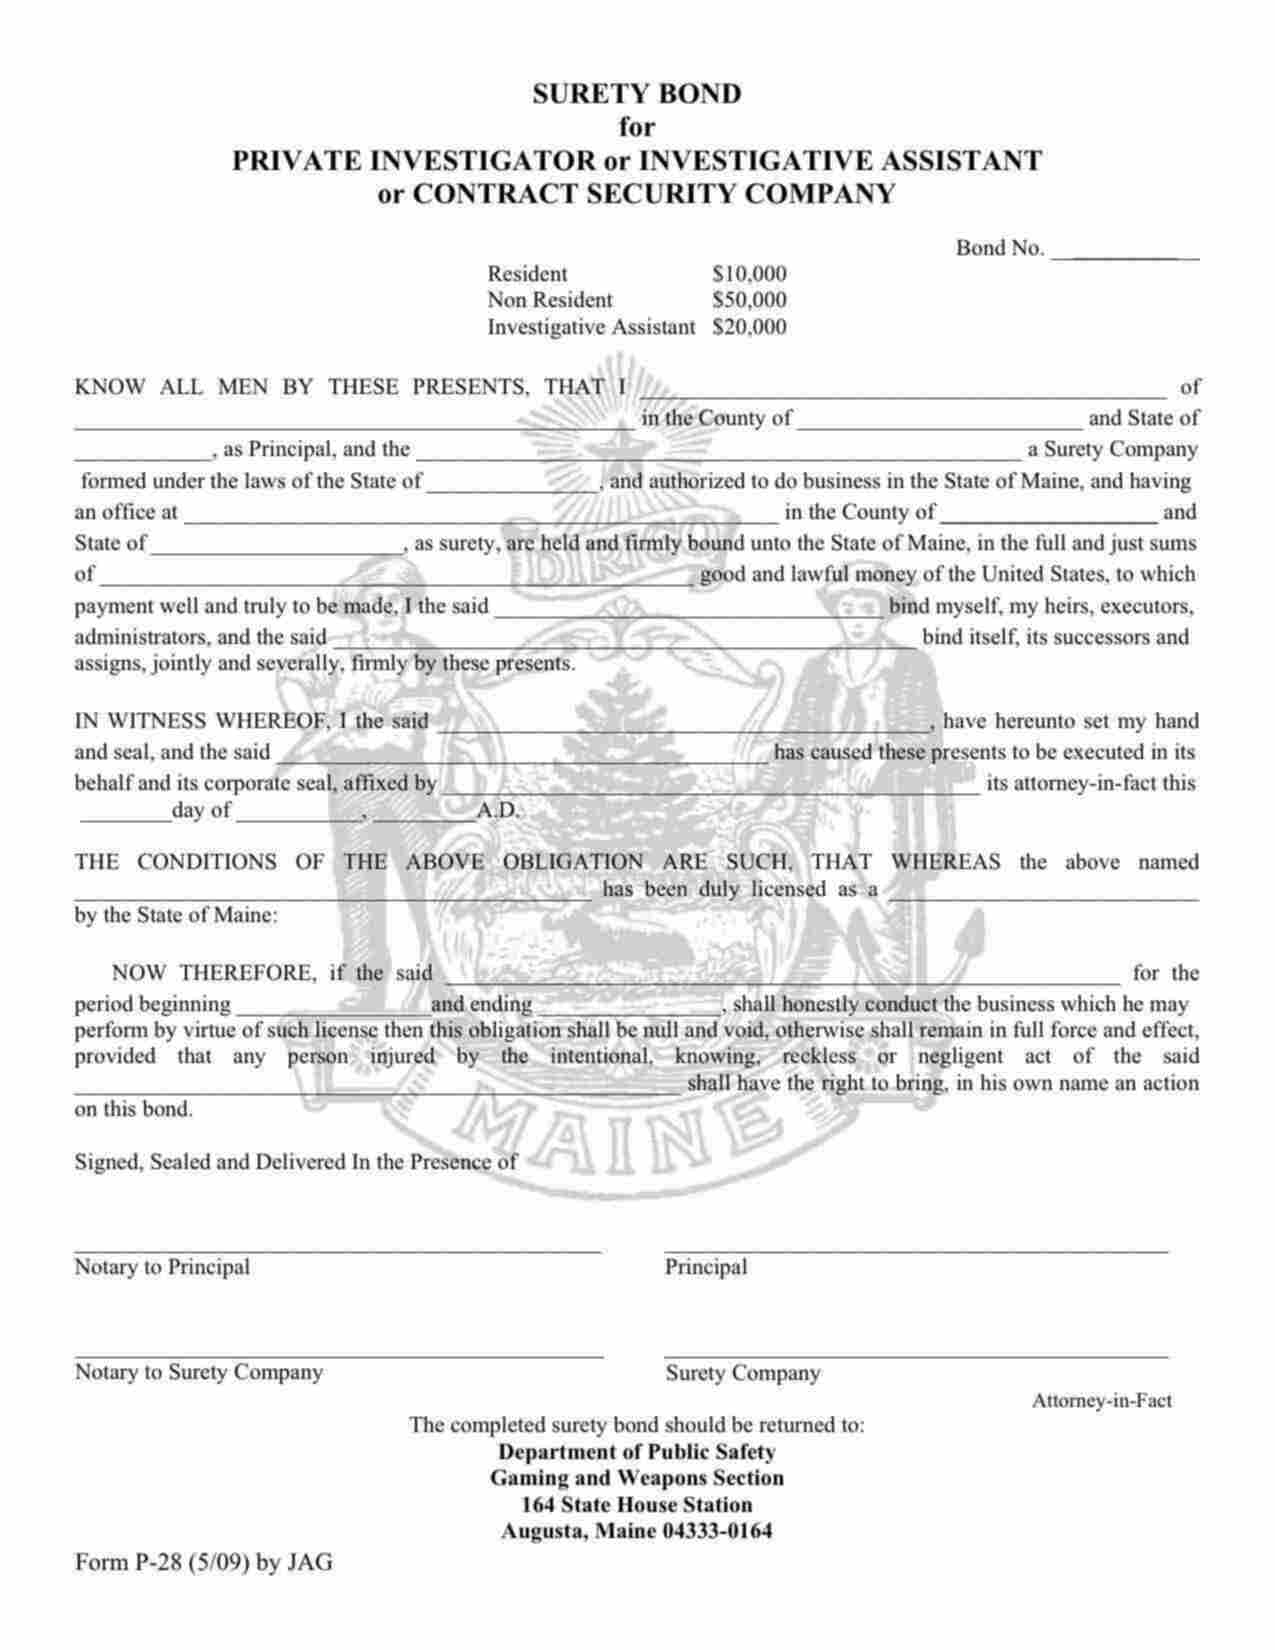 Maine Contract Security Company: Resident Bond Form